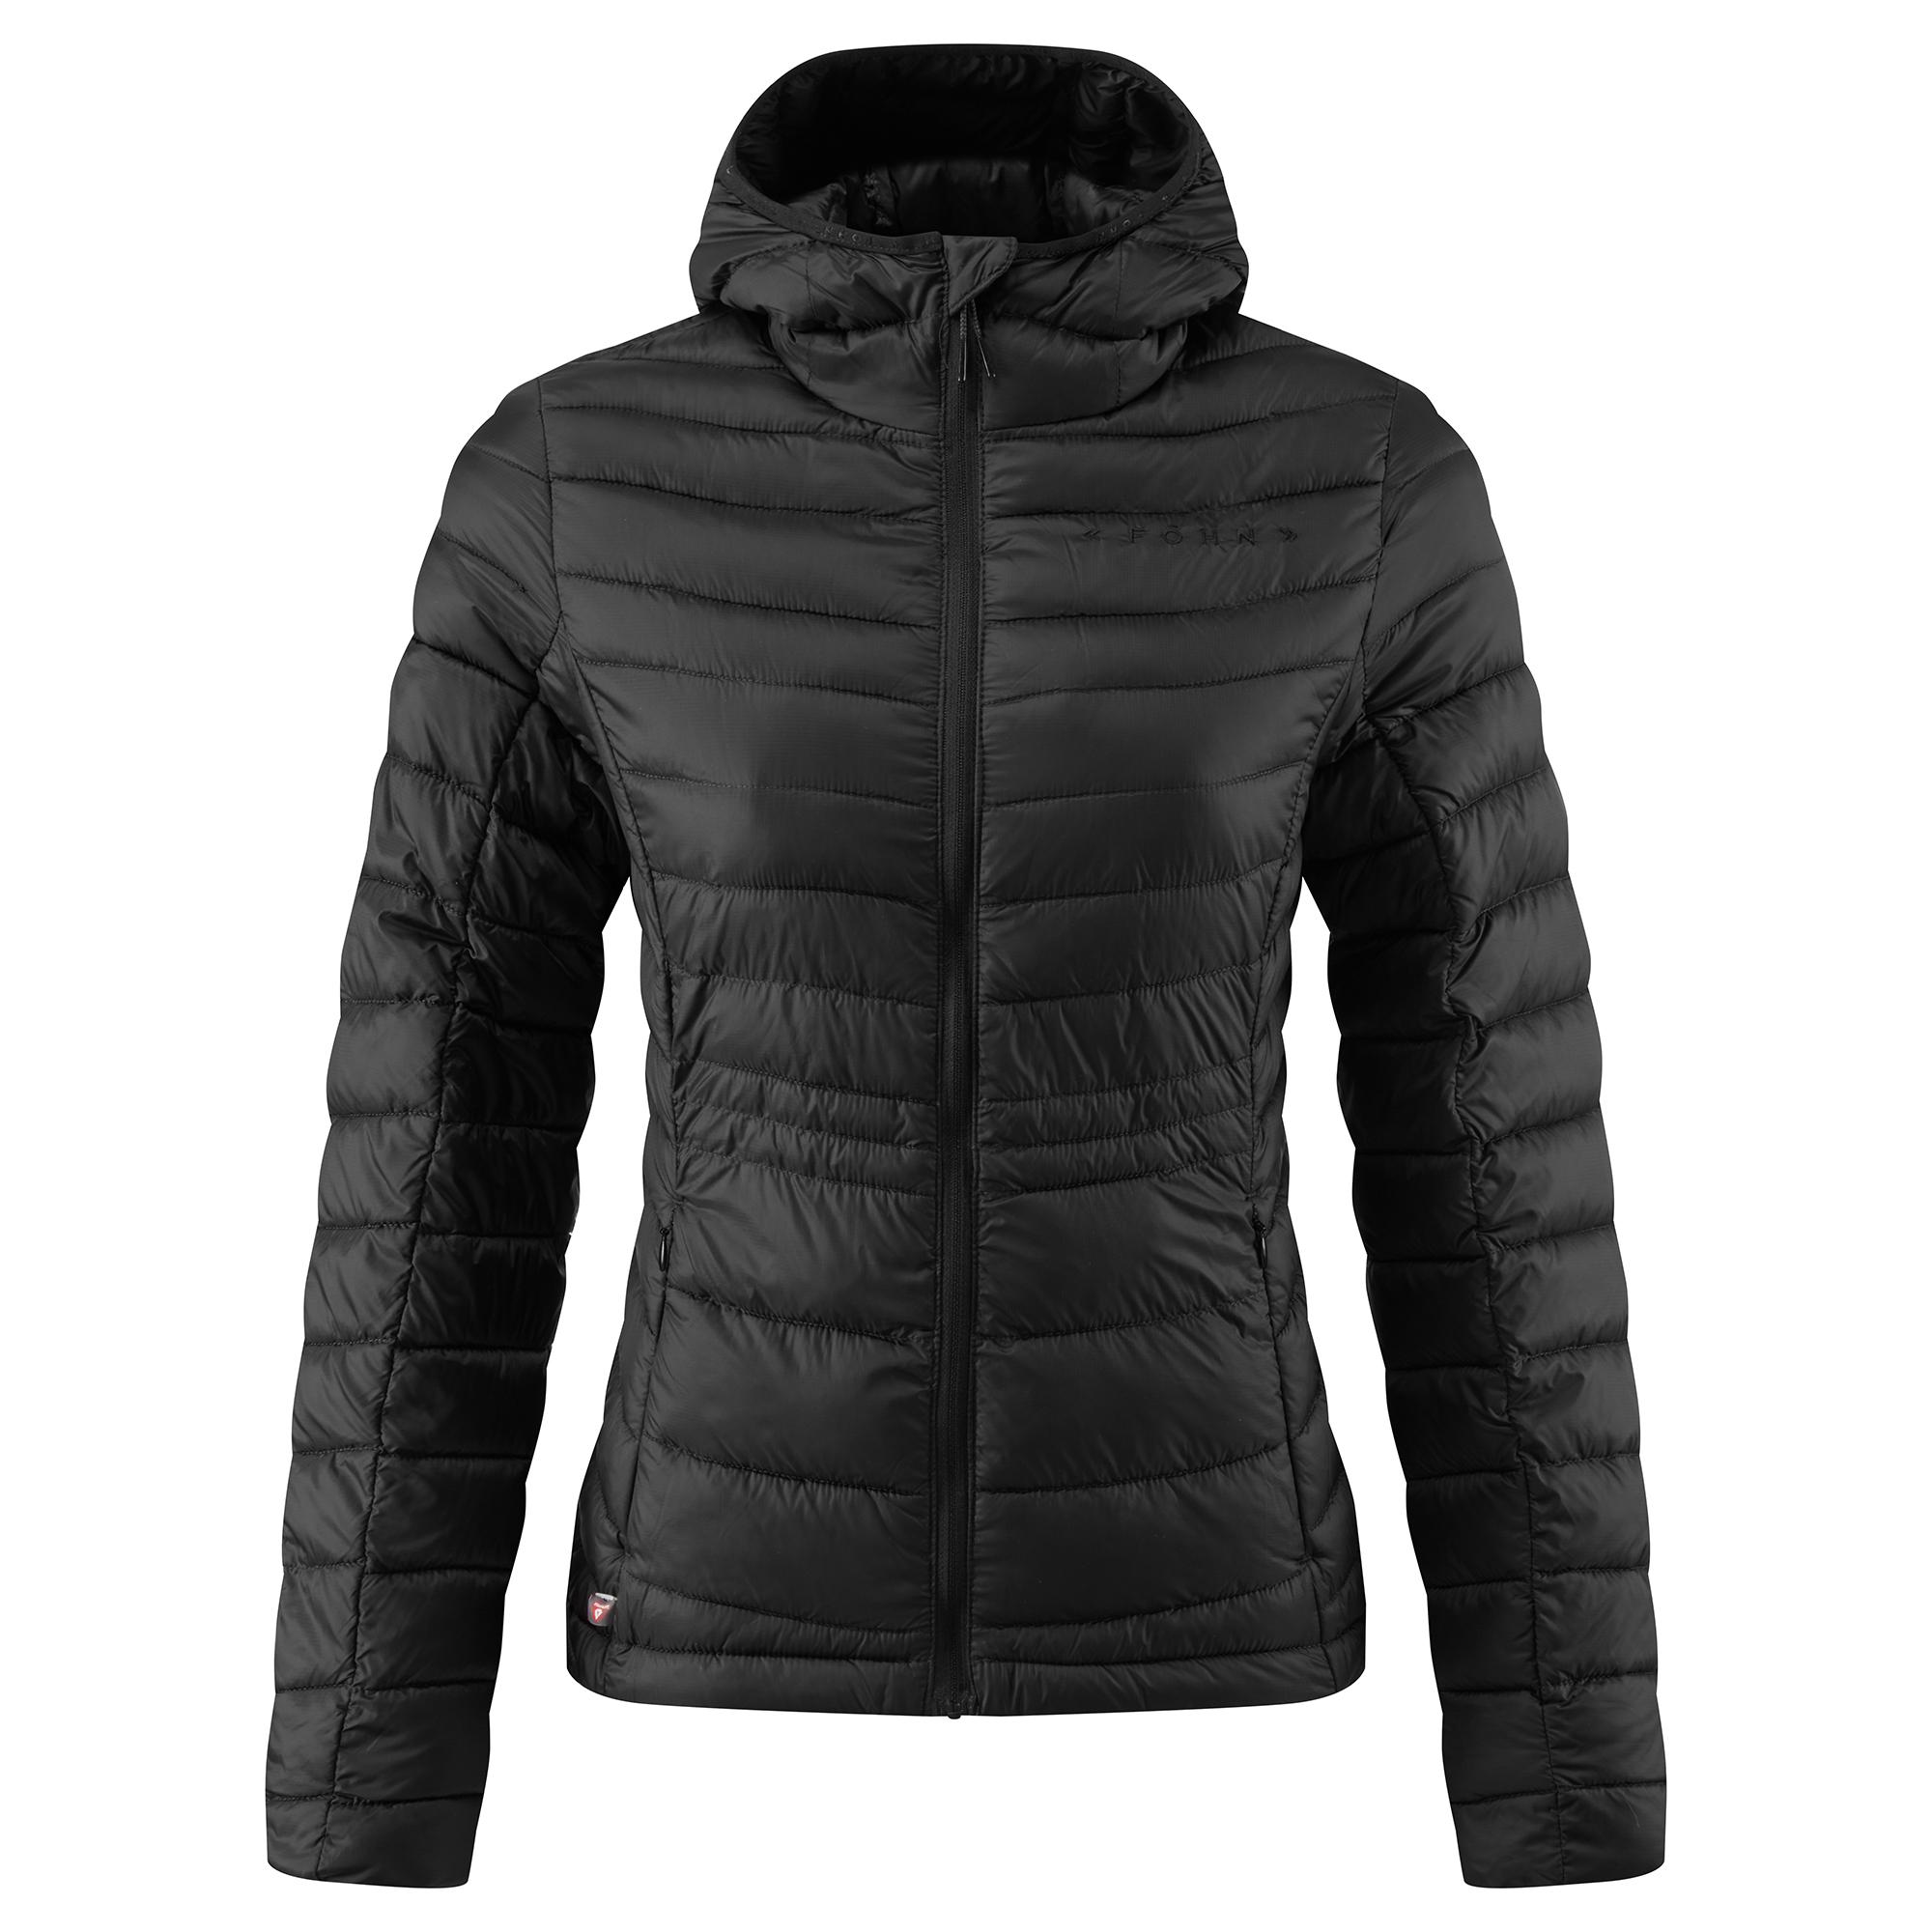 Fhn Womens Micro Synthetic Down Hooded Jacket - Black